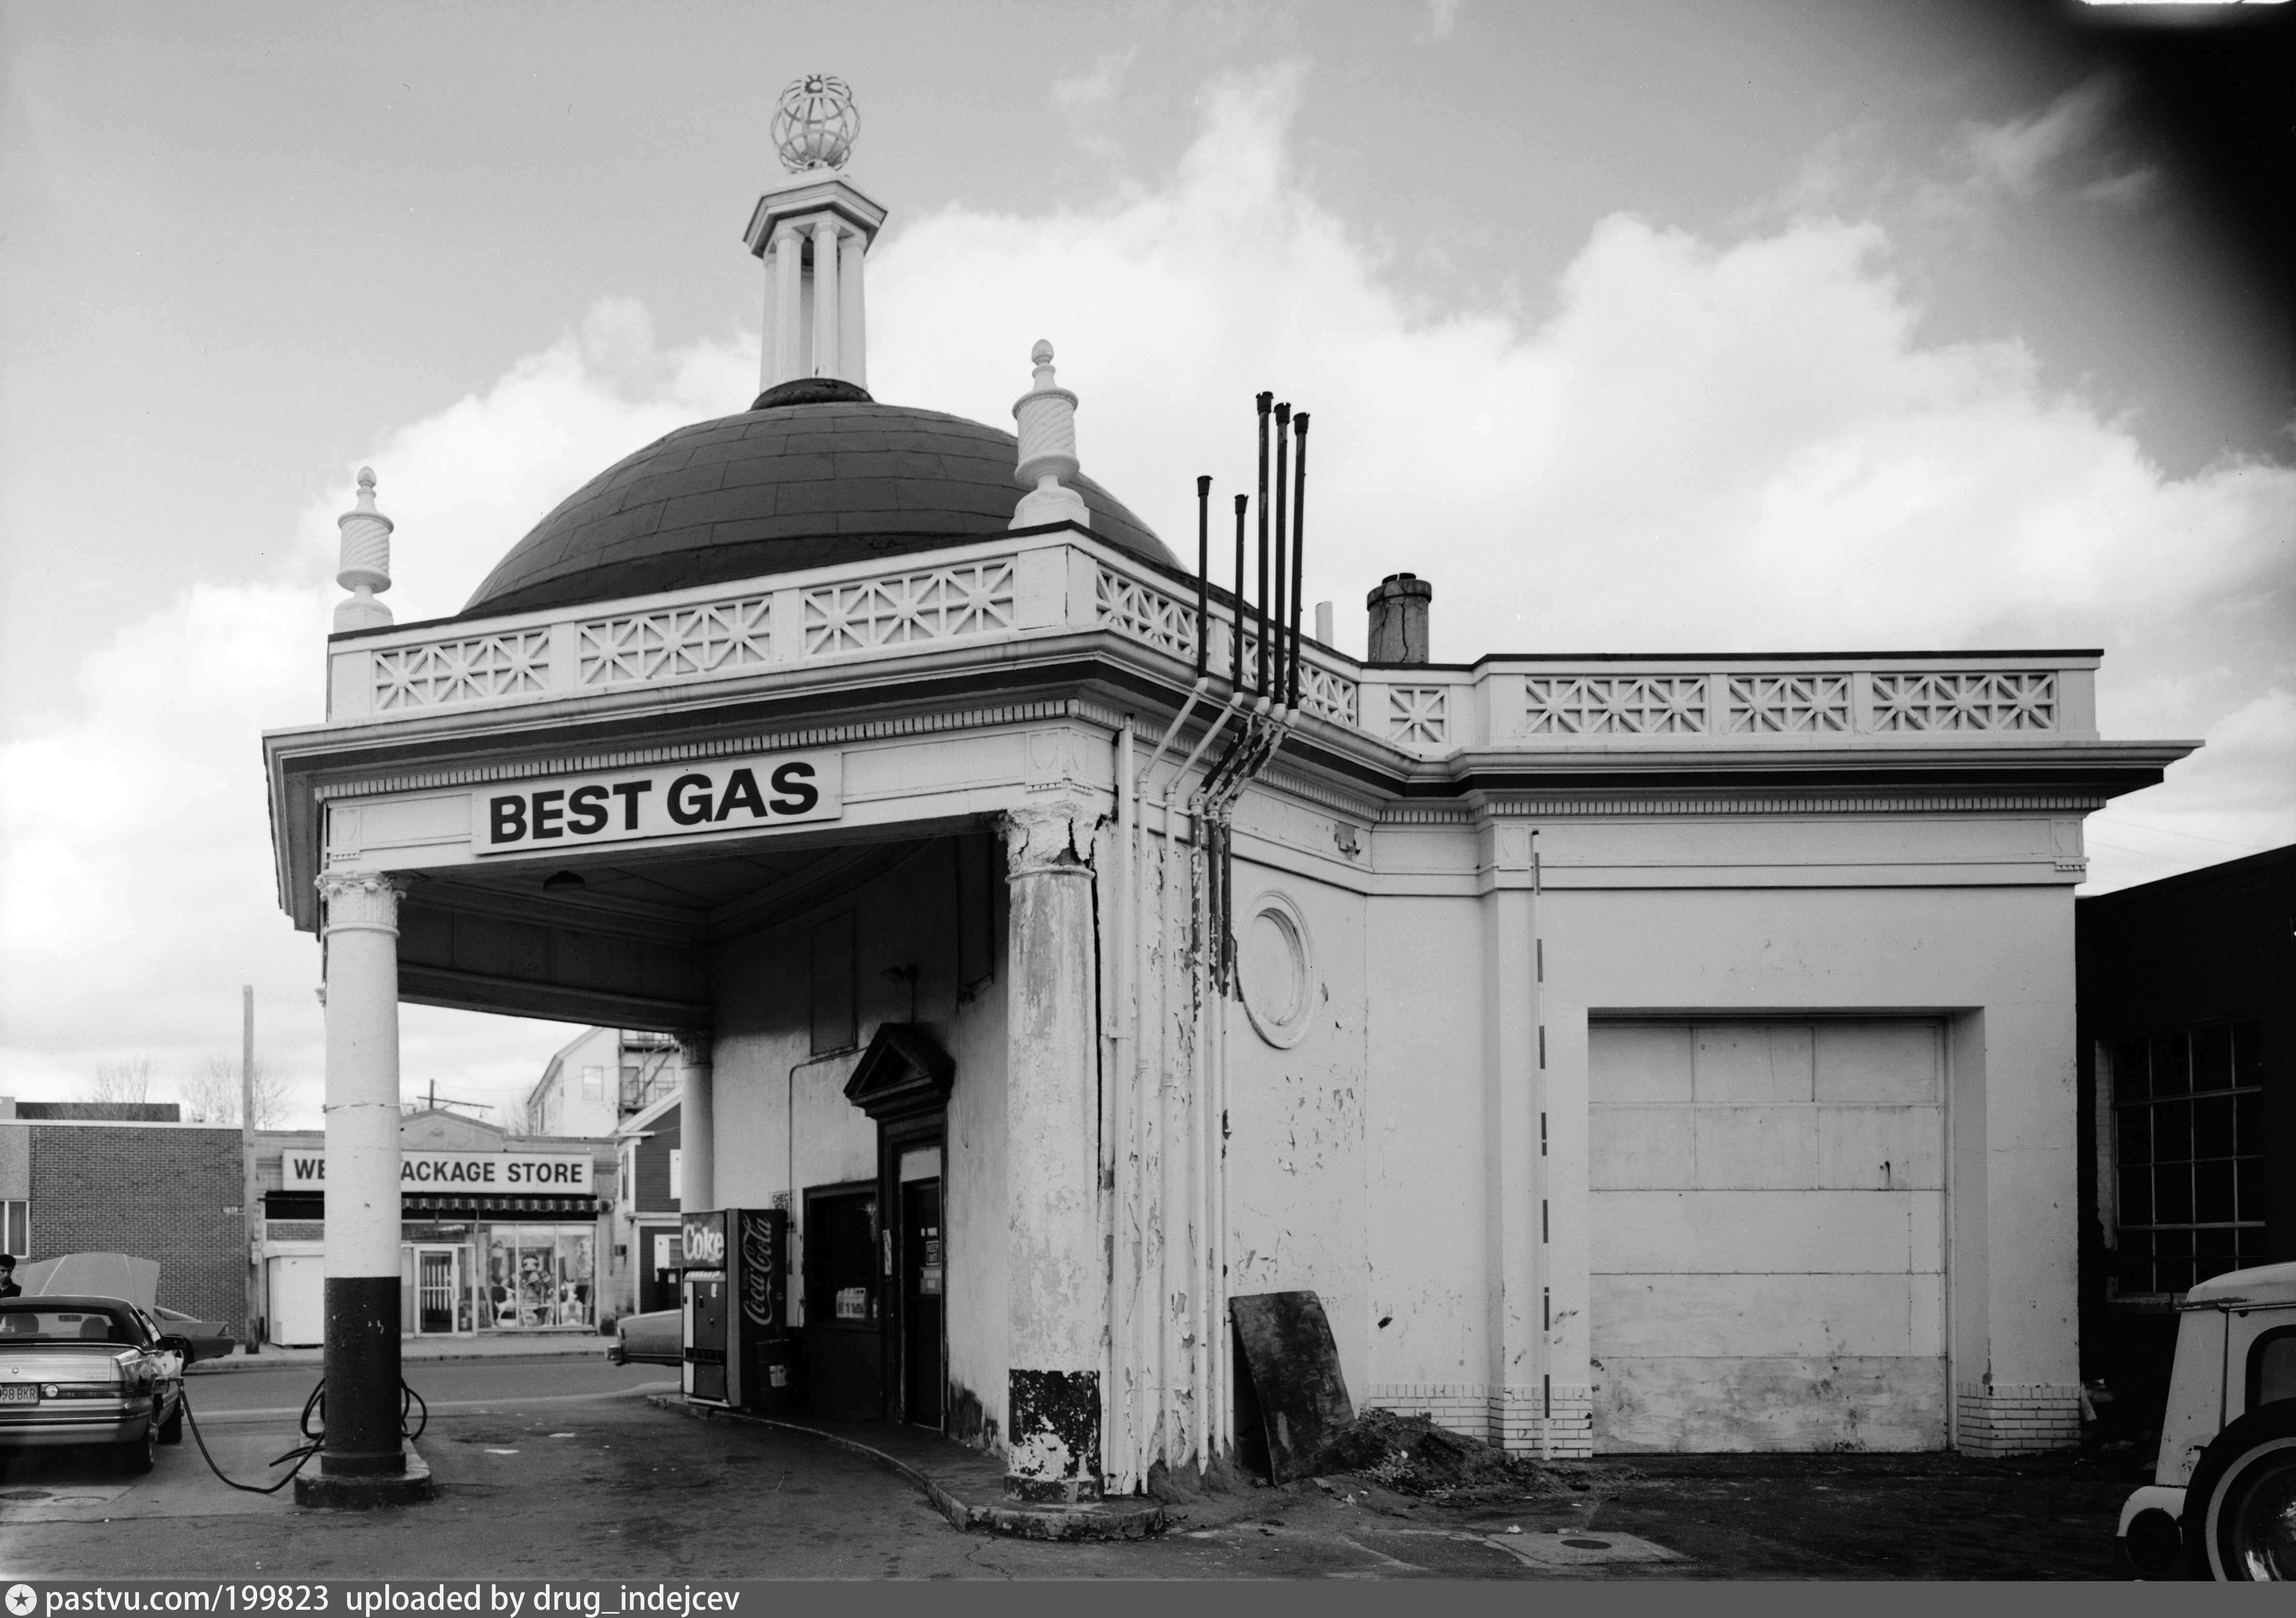 One Historical Gas Station In Woburn Ma 